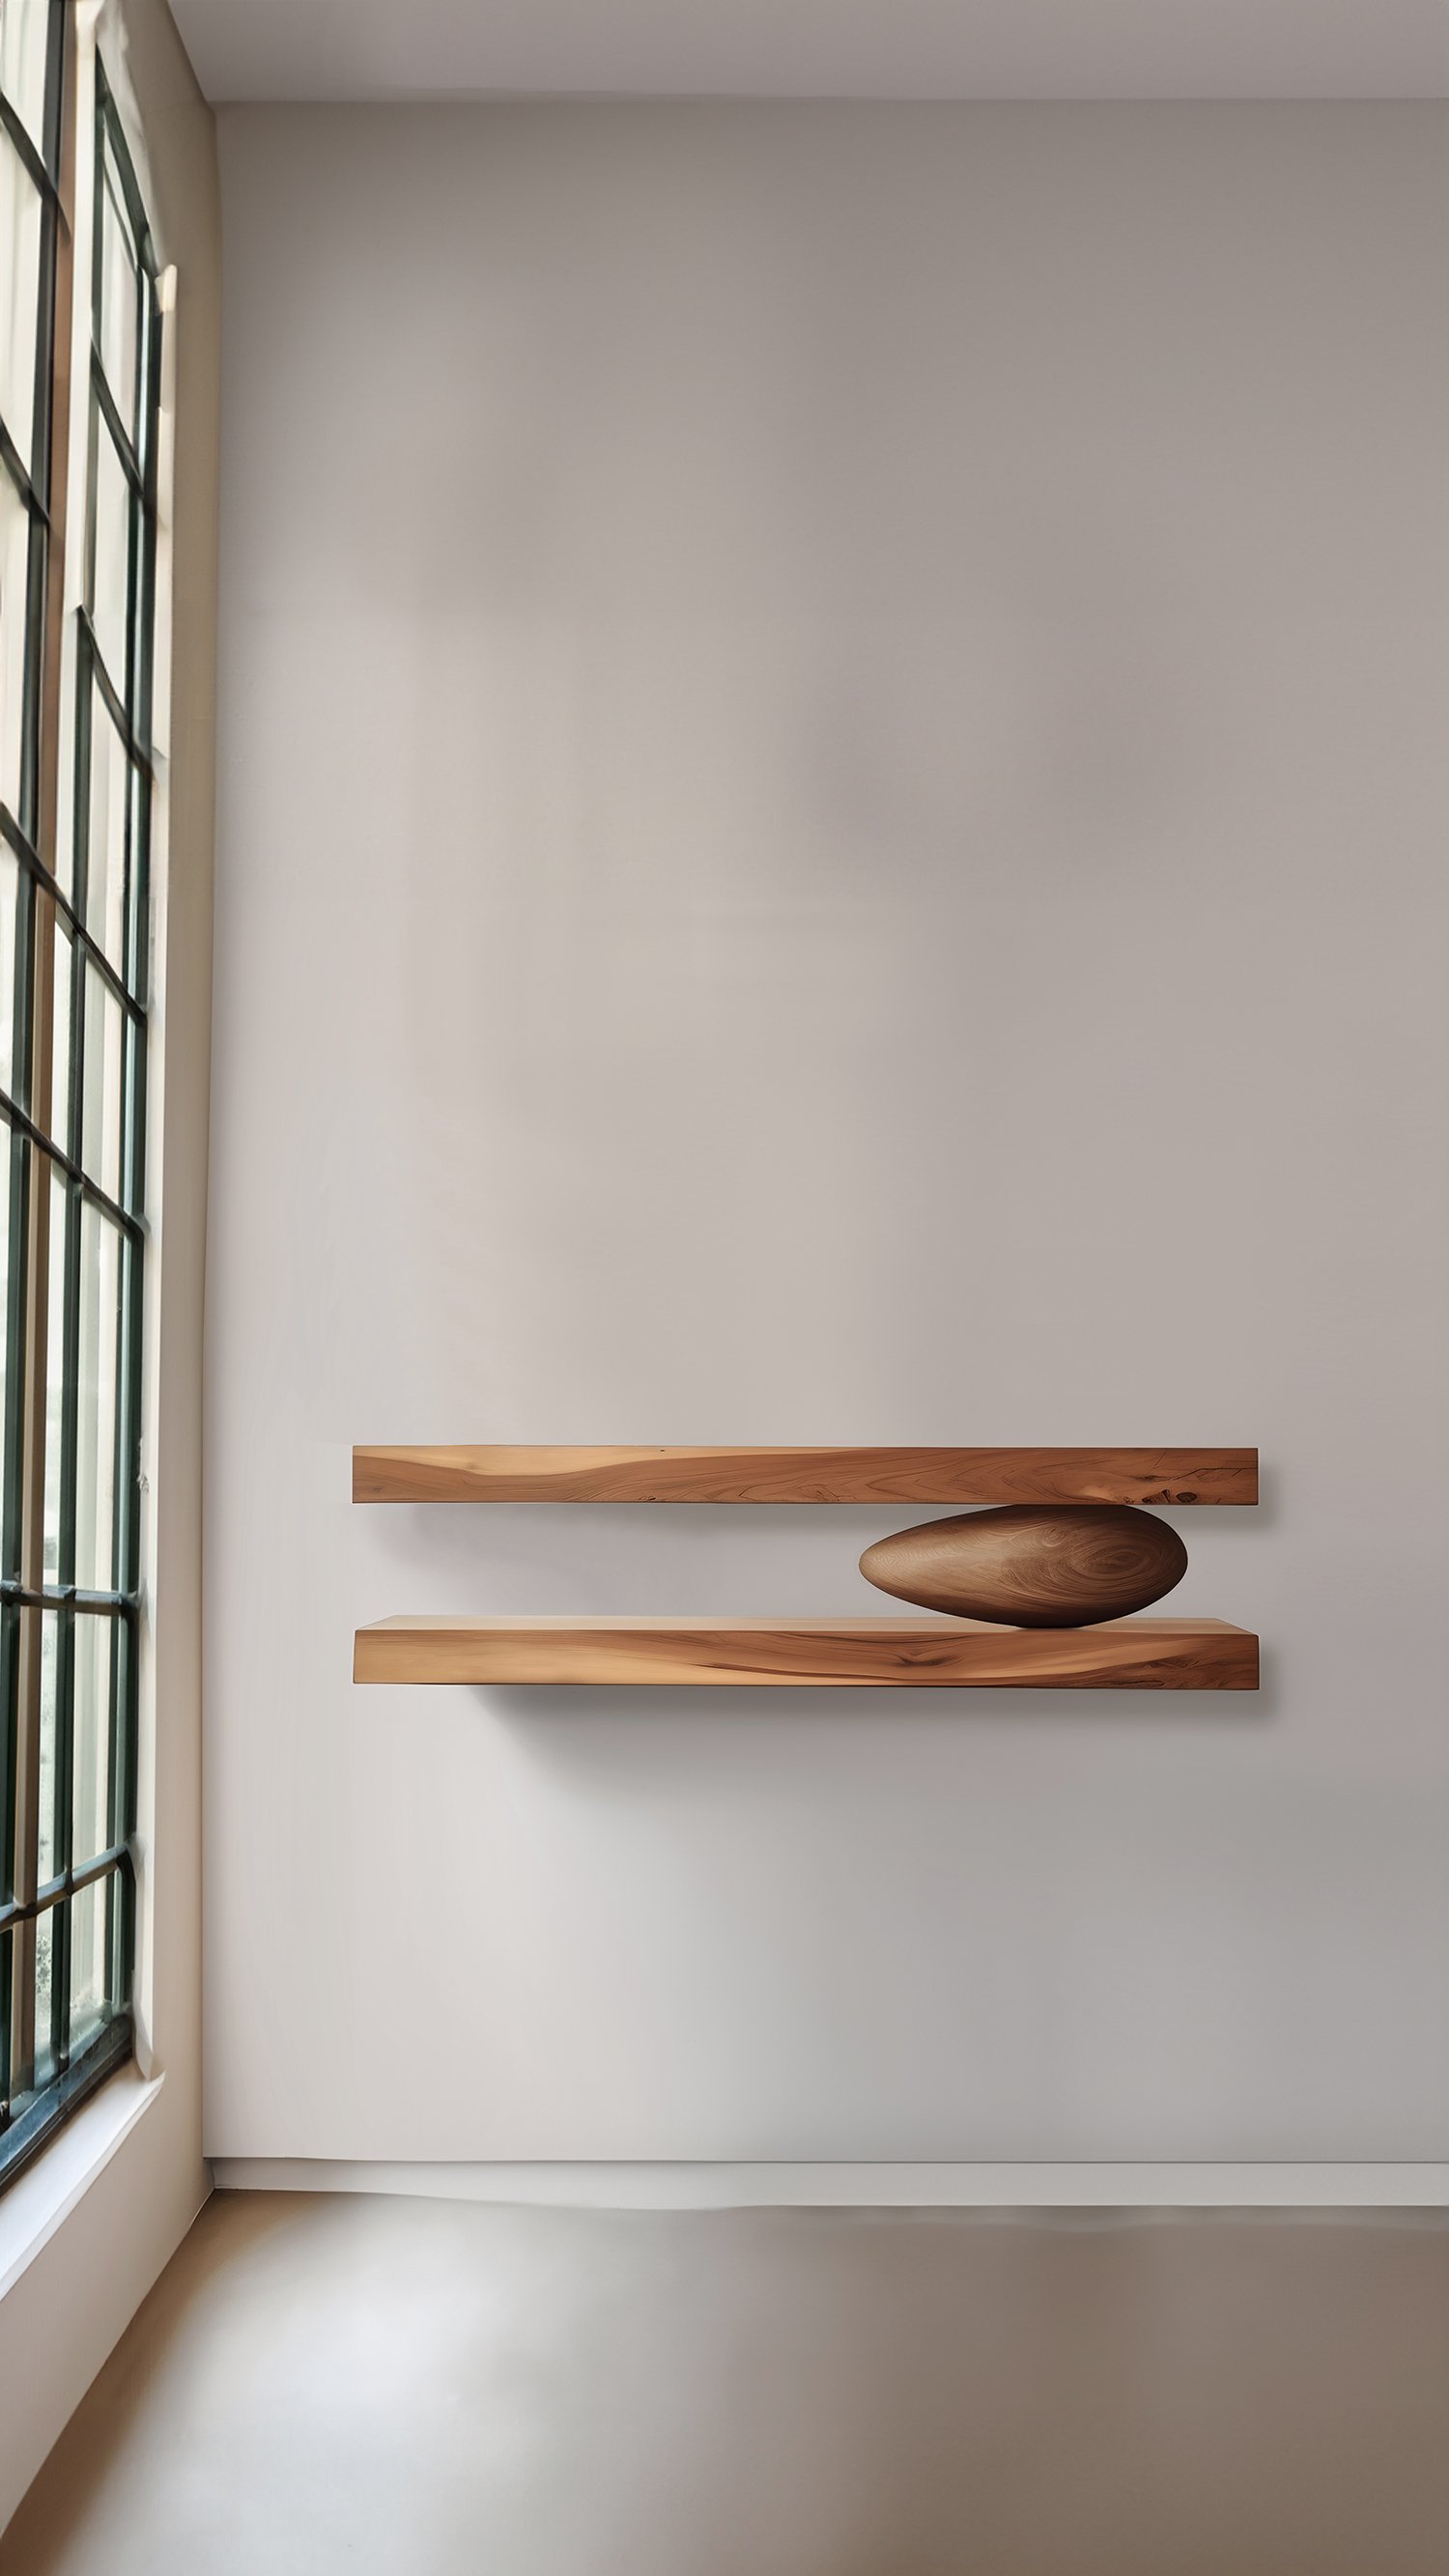 Set of Two Floating Shelves with One Sculptural Wooden Pebble Accent in the Middle, Sereno by Joel Escalona — 6.jpg